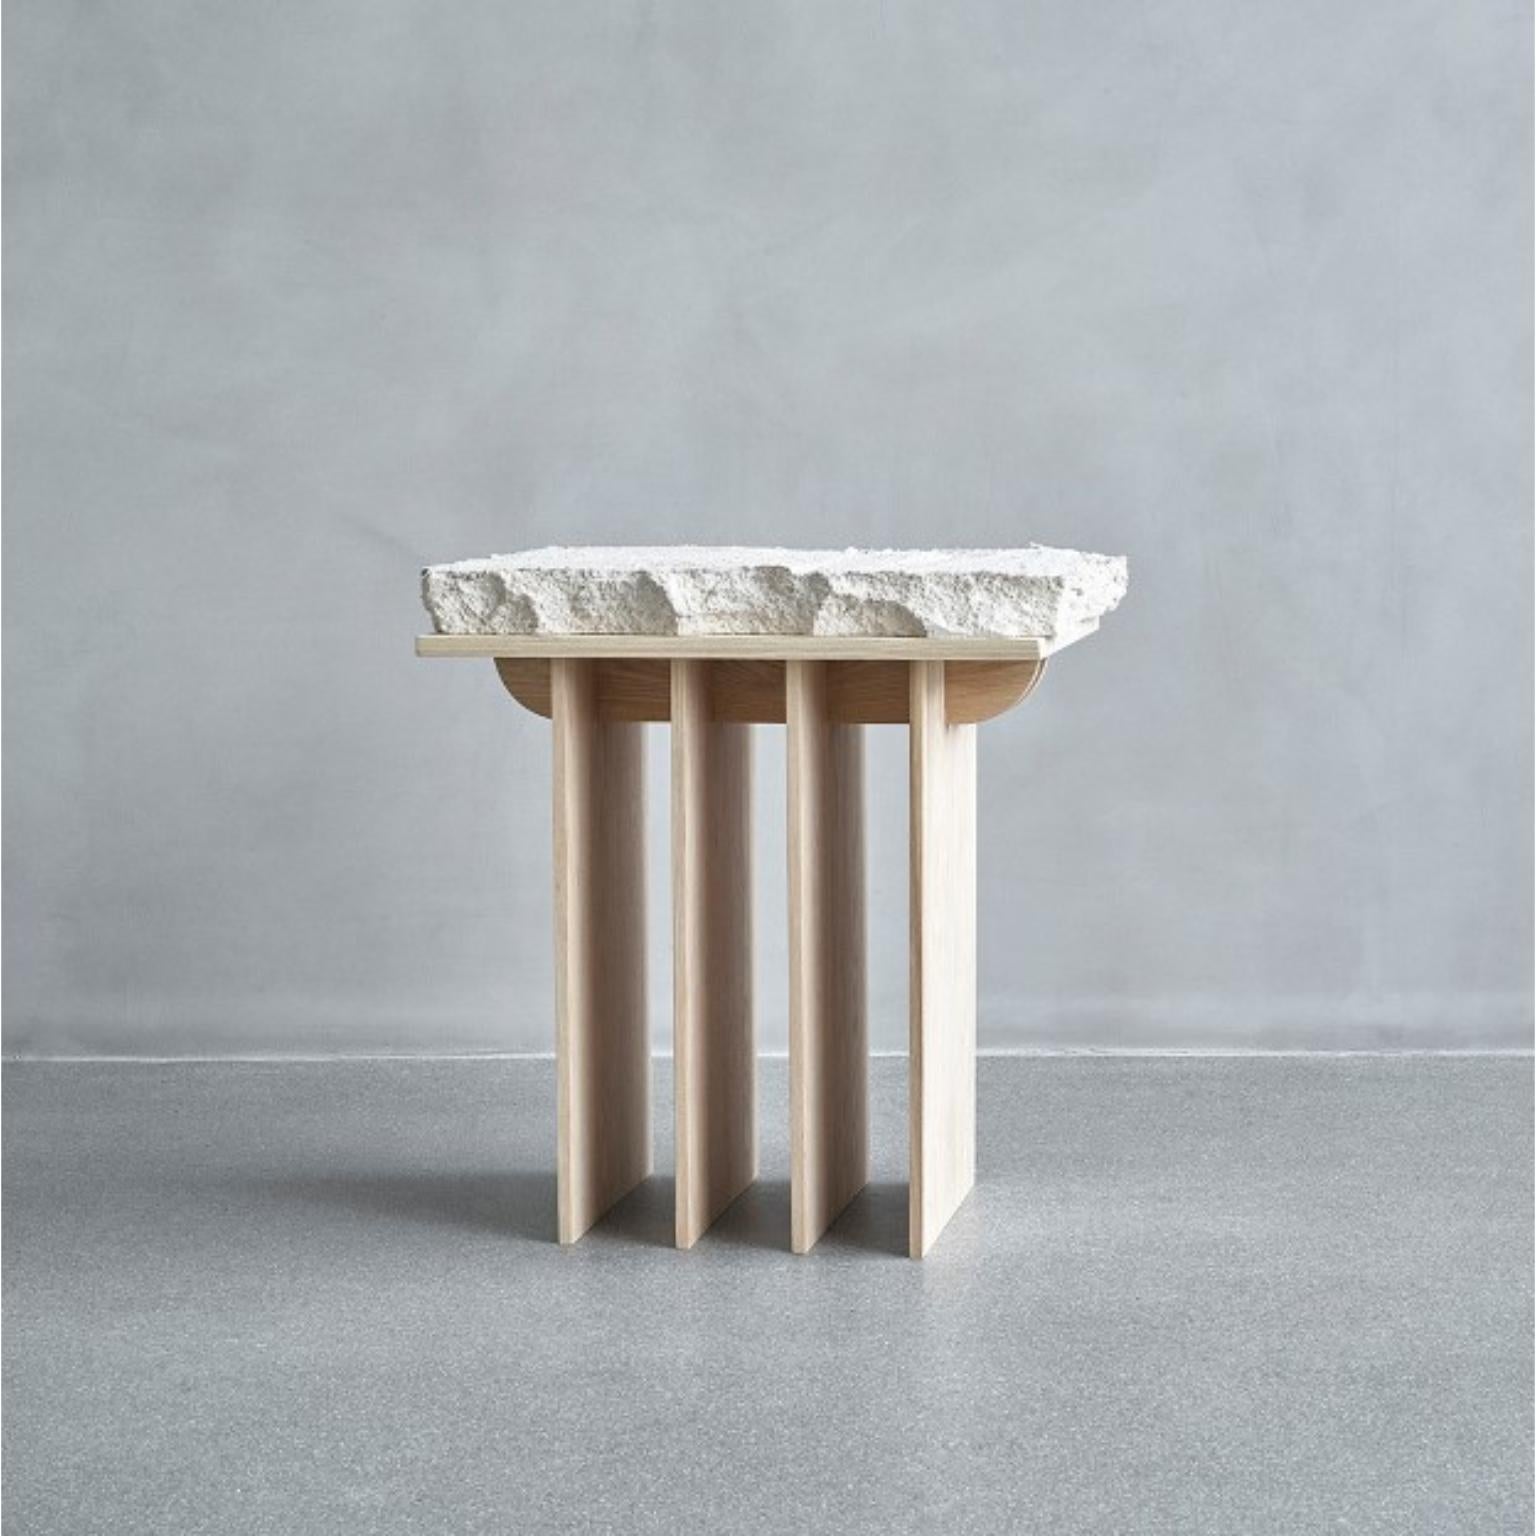 Thinking space side table and stool by Andredottir & Bobek
Dimensions: W 47 x D 32 x H 50 cm
Materials: Ash wood and reused foam/mattress and jesmontite hardner in color white ang green fade.

Our work aims to encourage art and design as